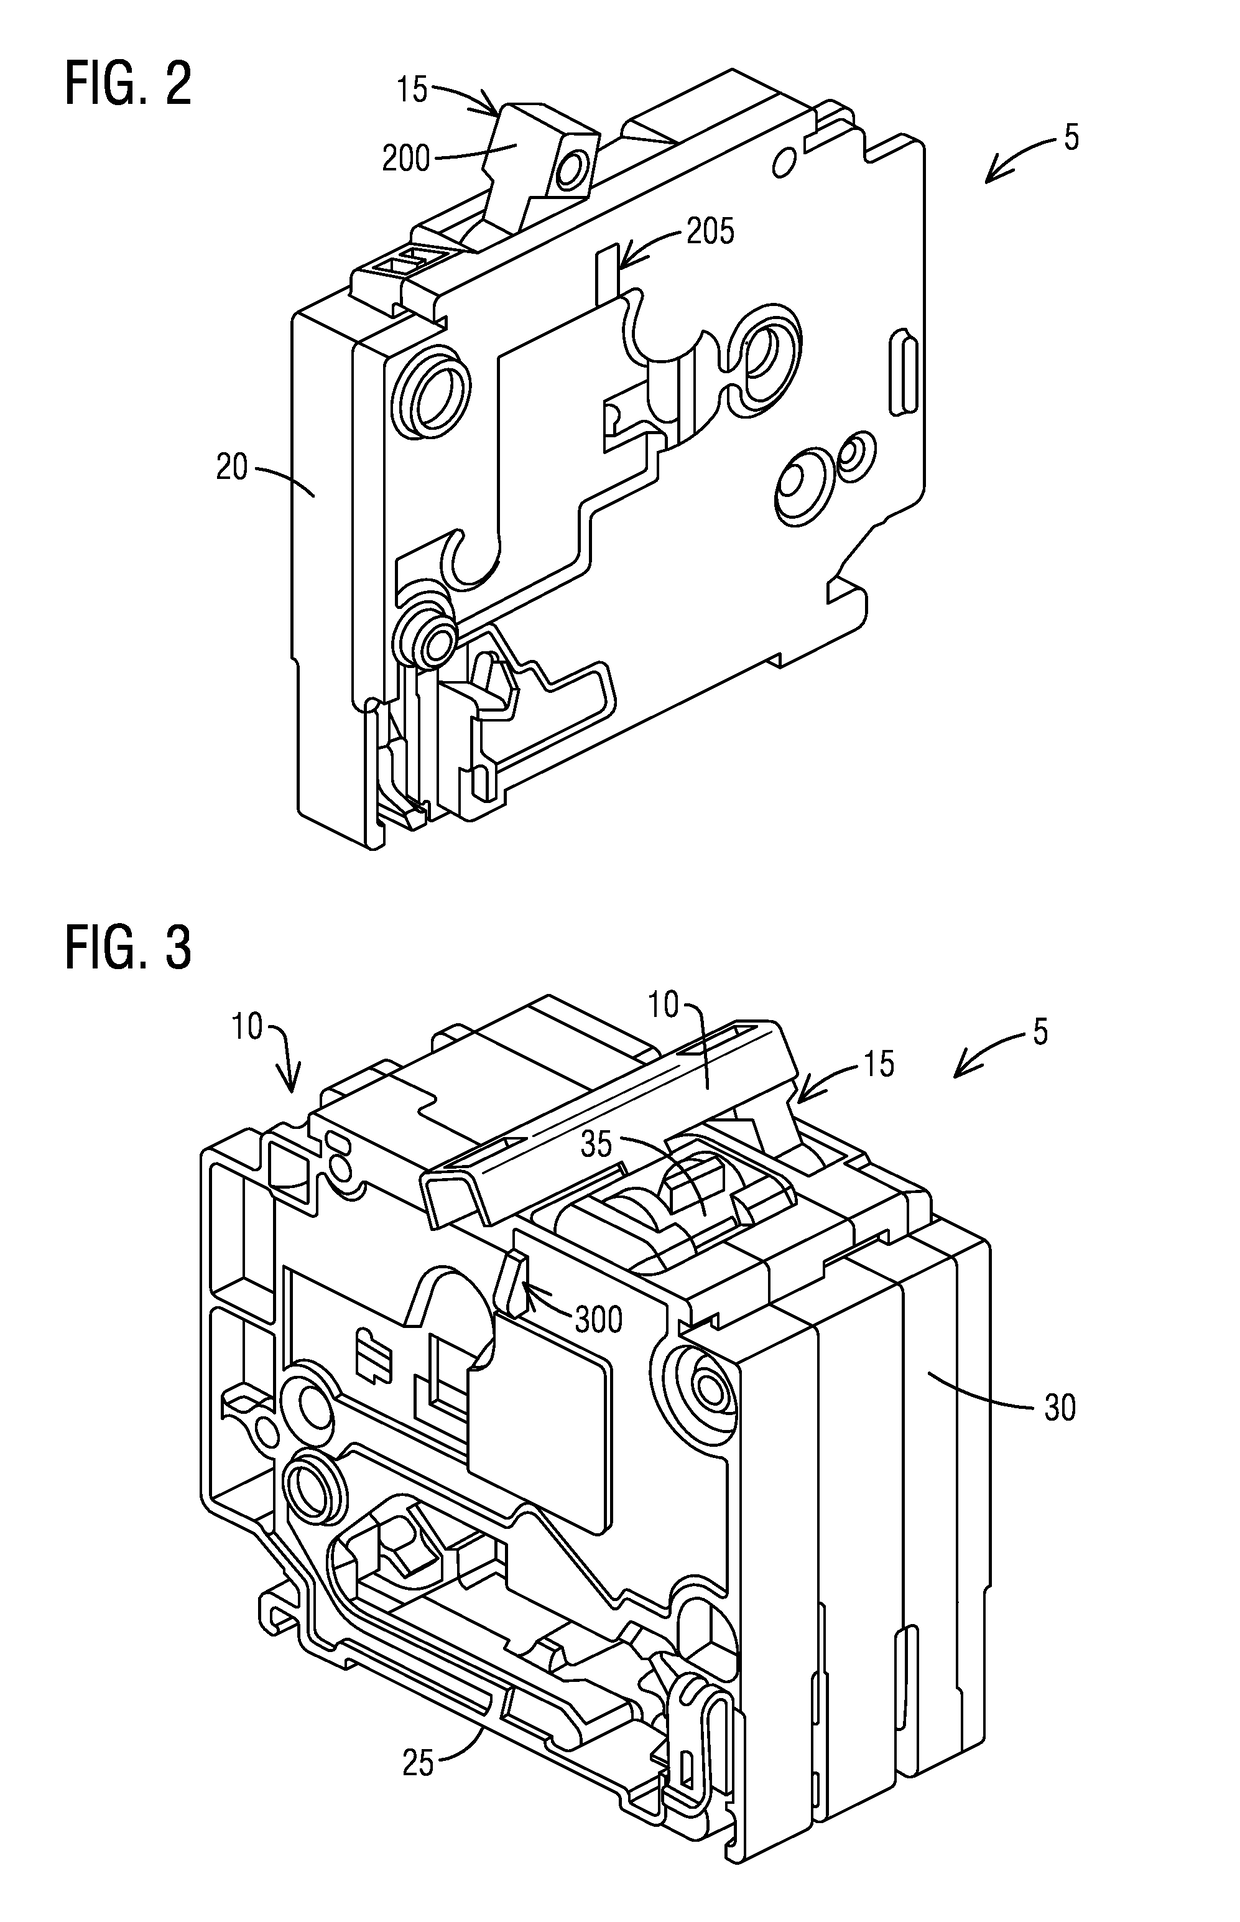 Apparatus and method of blocking and unblocking a breaker handle of a circuit breaker